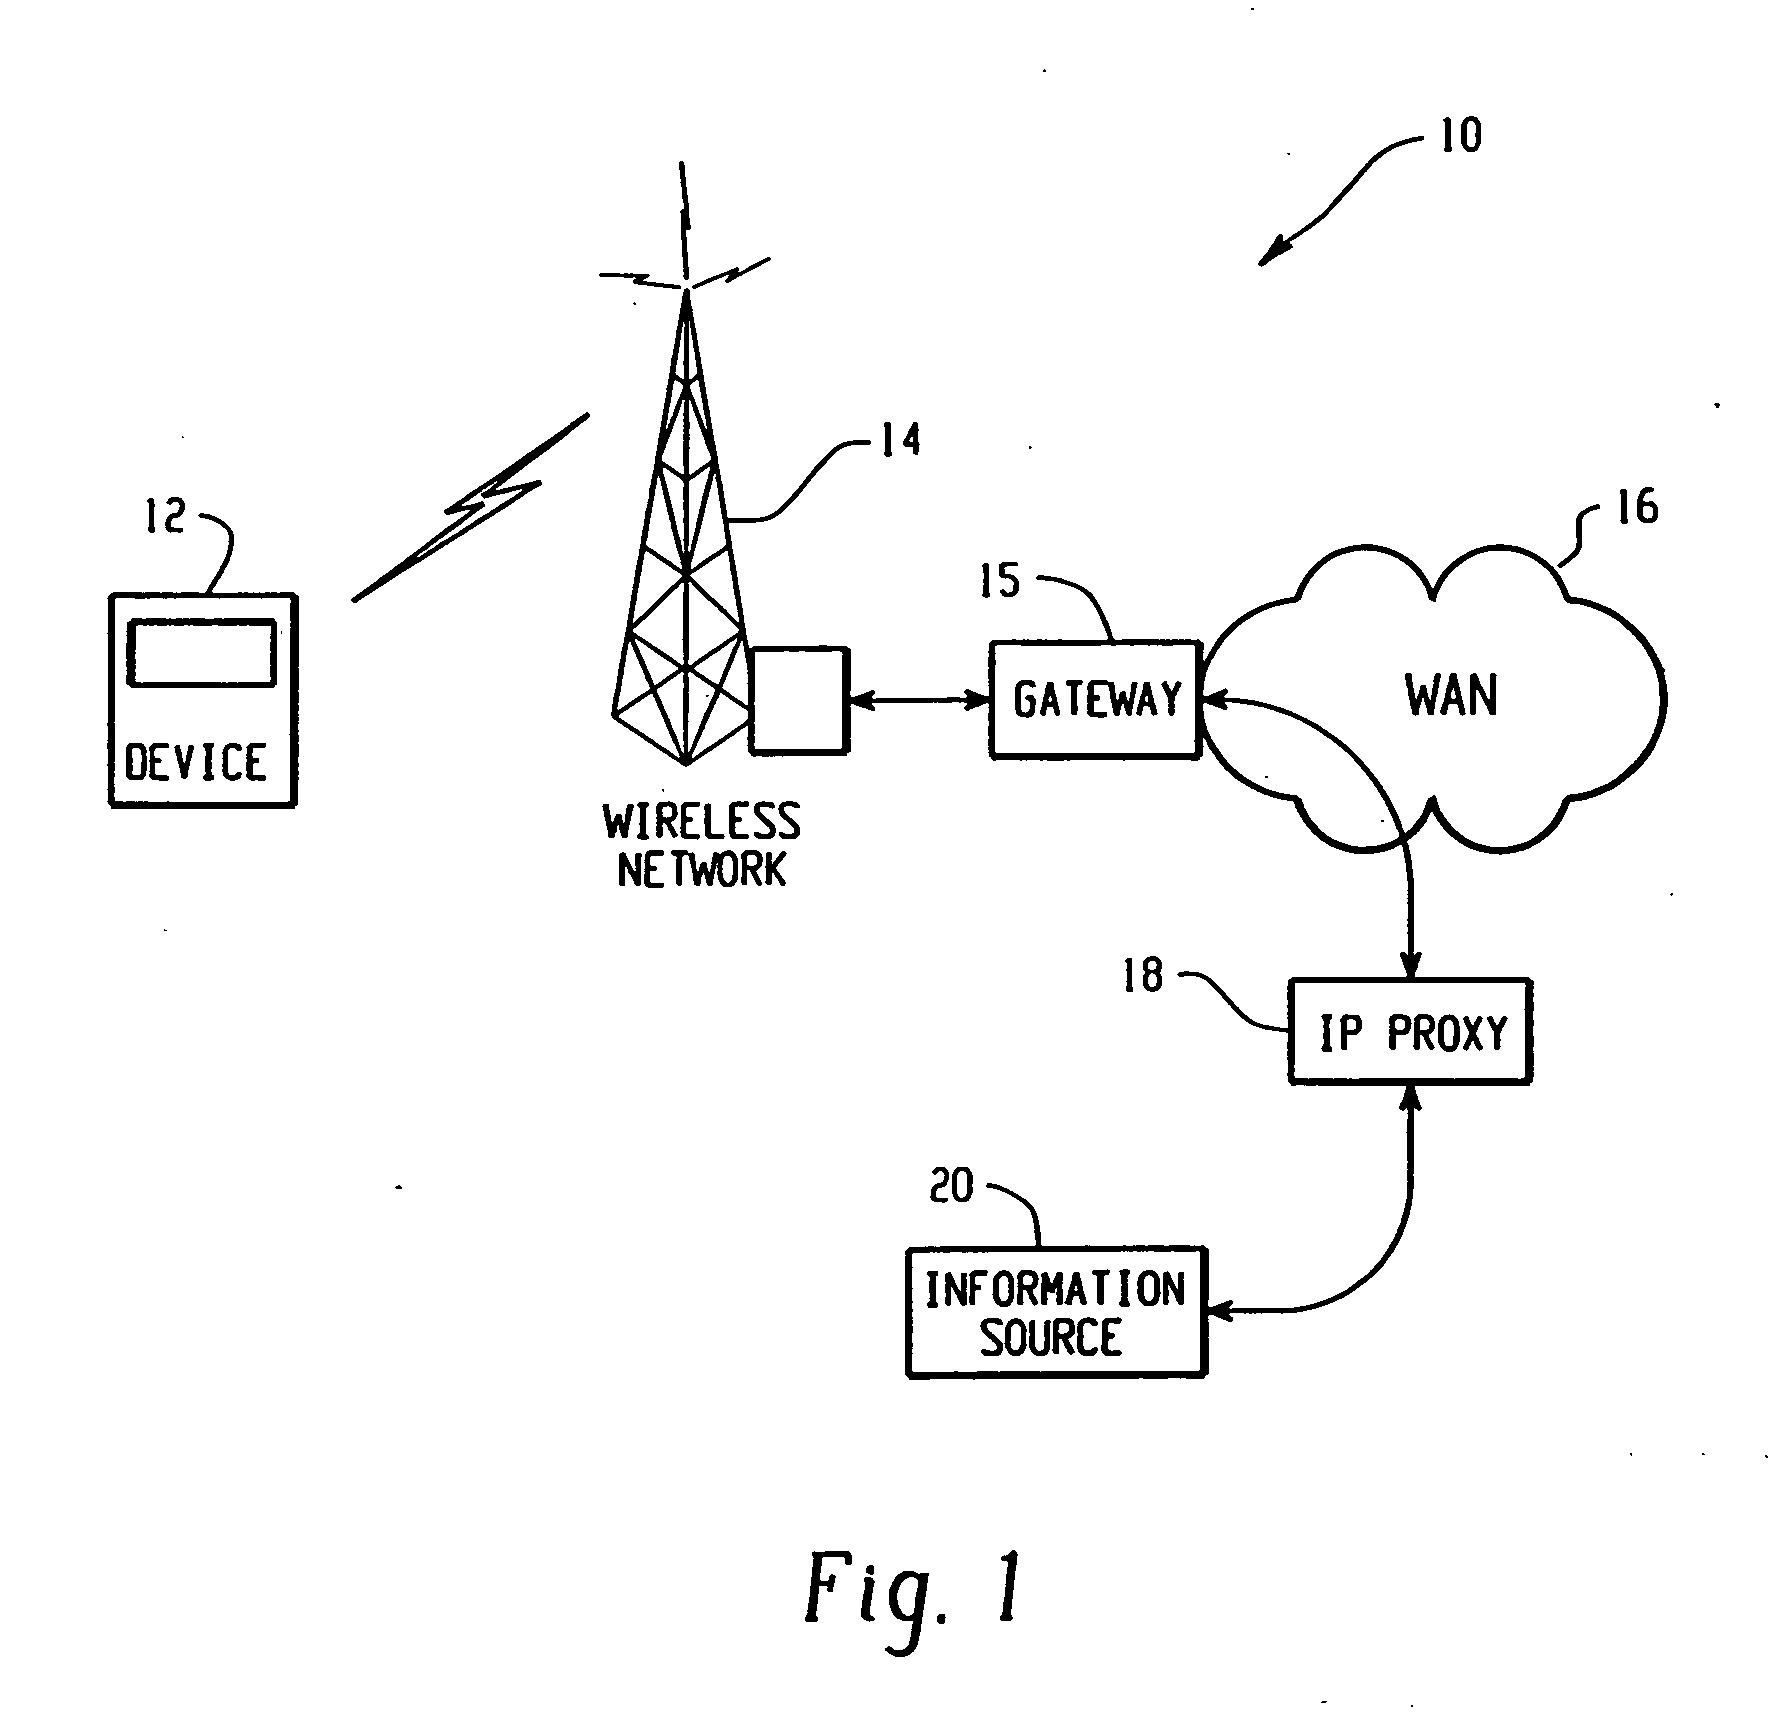 System and method for providing remote data access for a mobile communication device